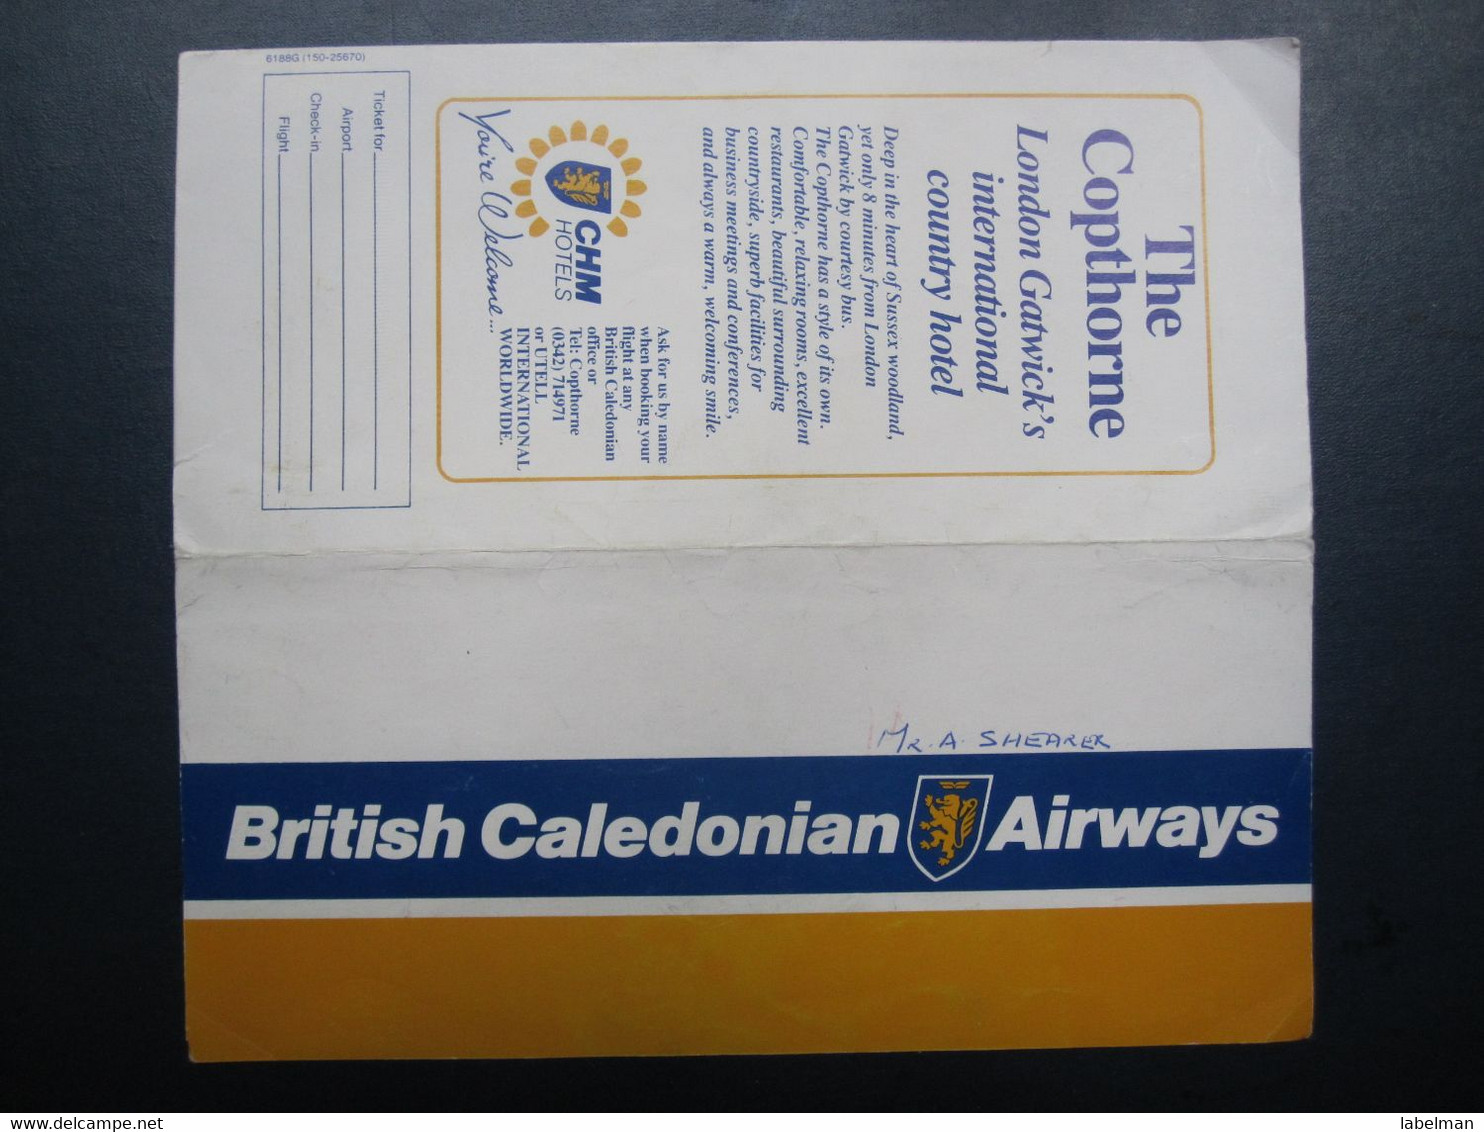 BRITISH CALEDONIAN UK AVIATION AIRWAYS AIRLINE TICKET HOLDER BOOKLET VIP TAG LUGGAGE BAGGAGE PLANE AIRCRAFT AIRPORT - Wereld